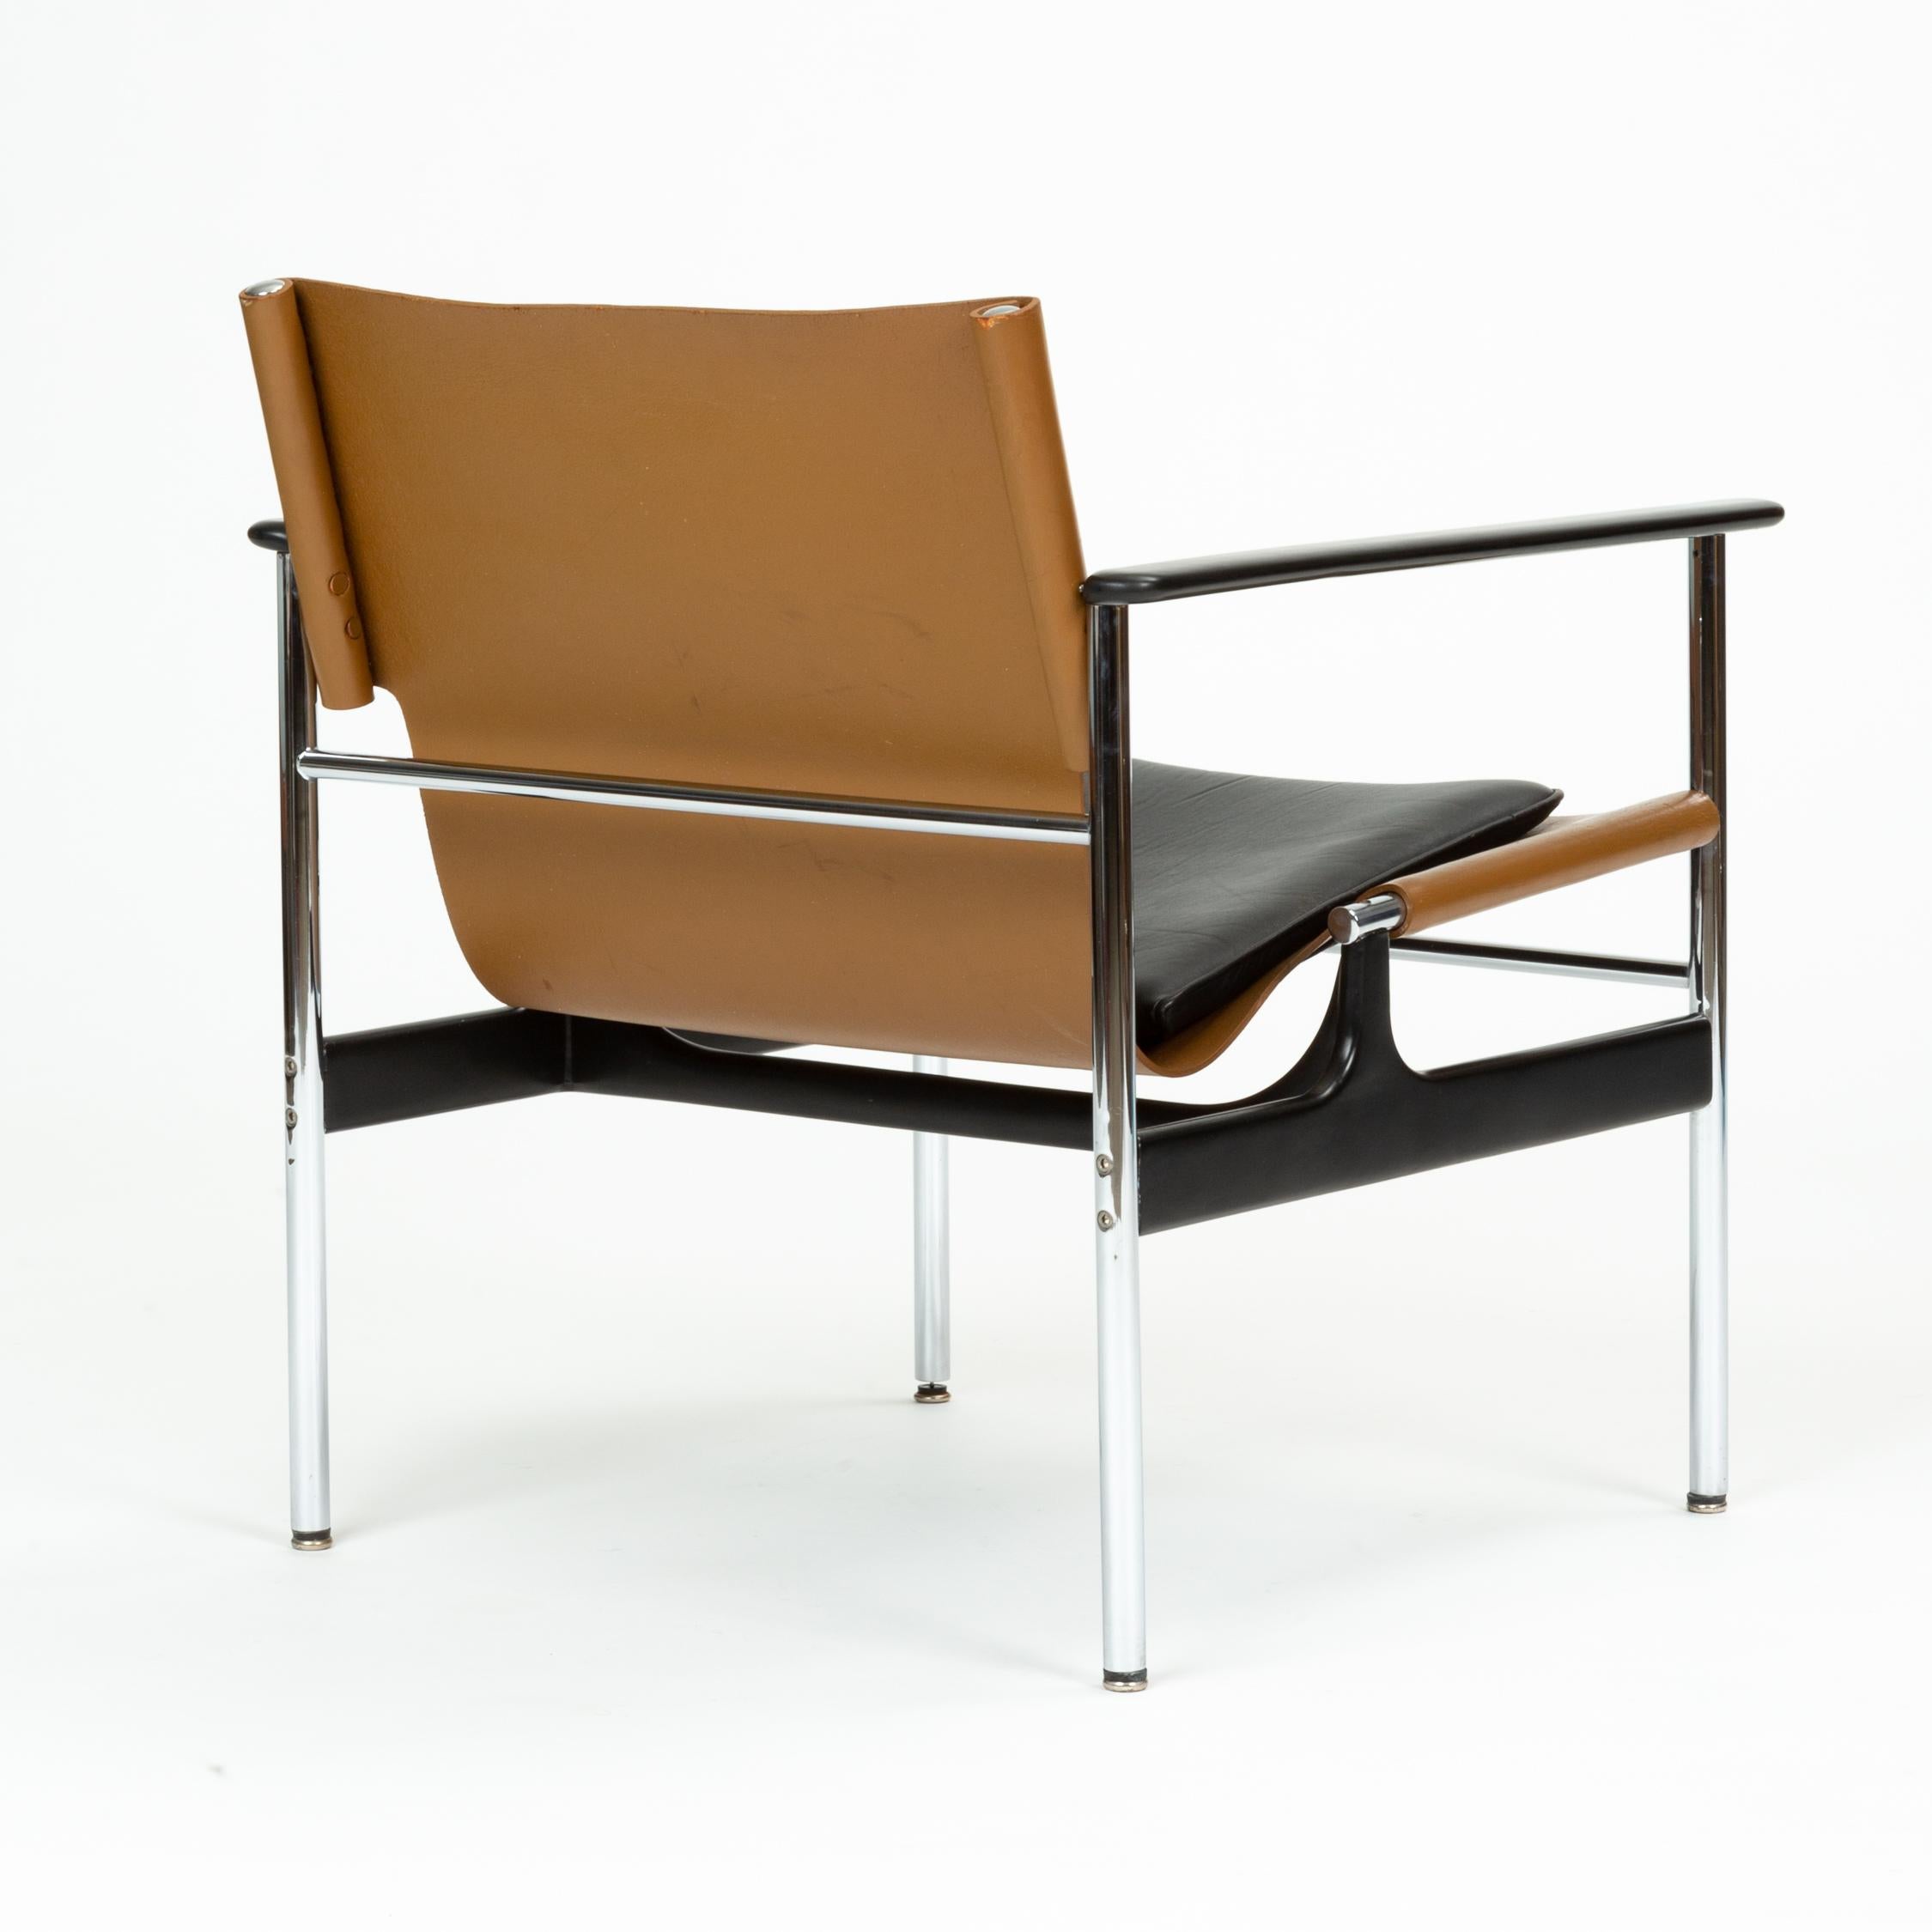 Mid-20th Century Charles Pollock for Knoll Model 657 Lounge Chair